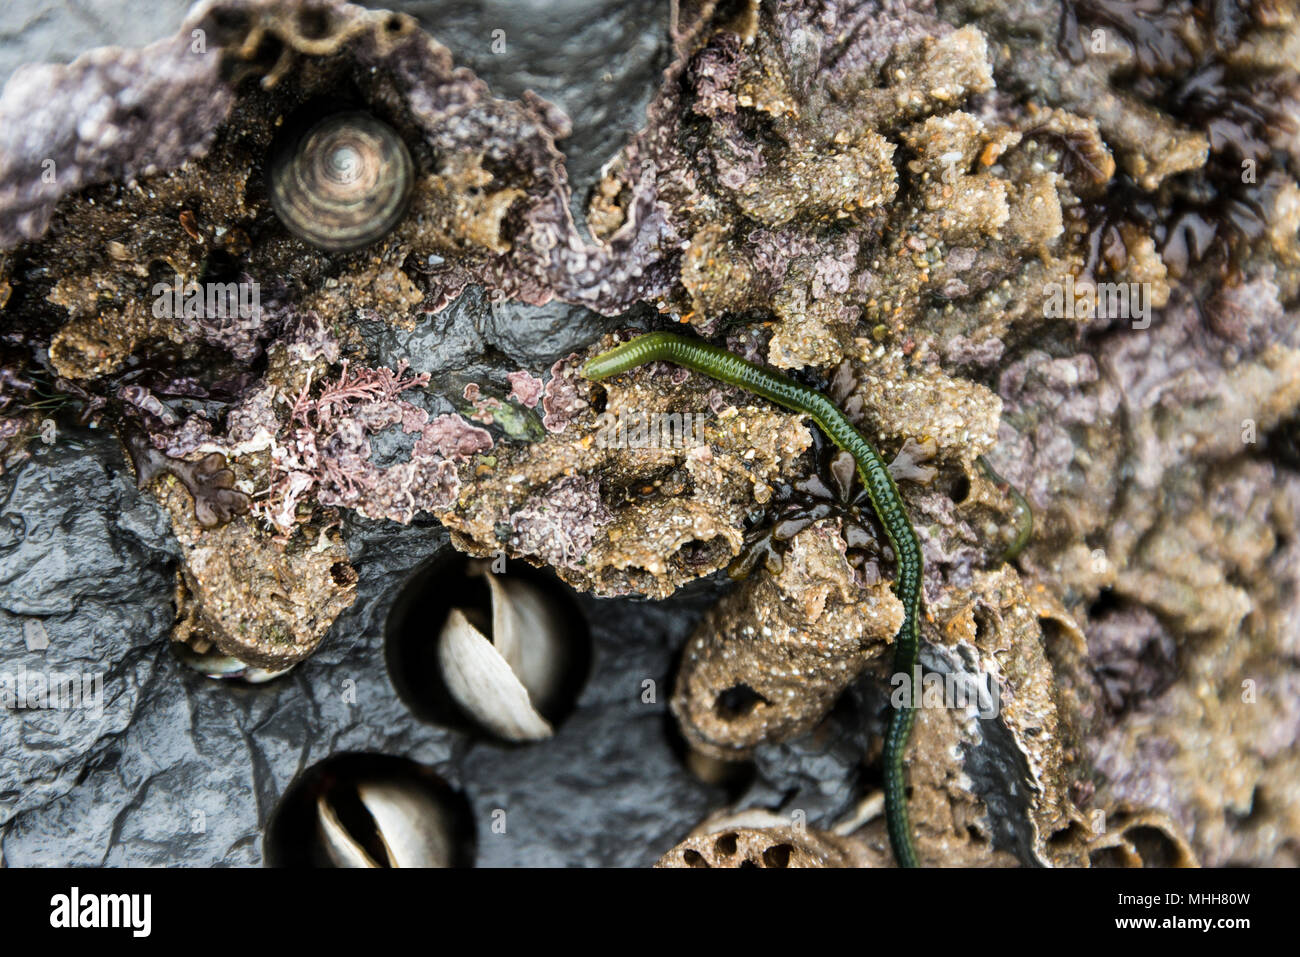 A green-leaf worm (Eulalia viridis) on rocks containing piddocks (Pholadidae sp.) in their bore holes Stock Photo